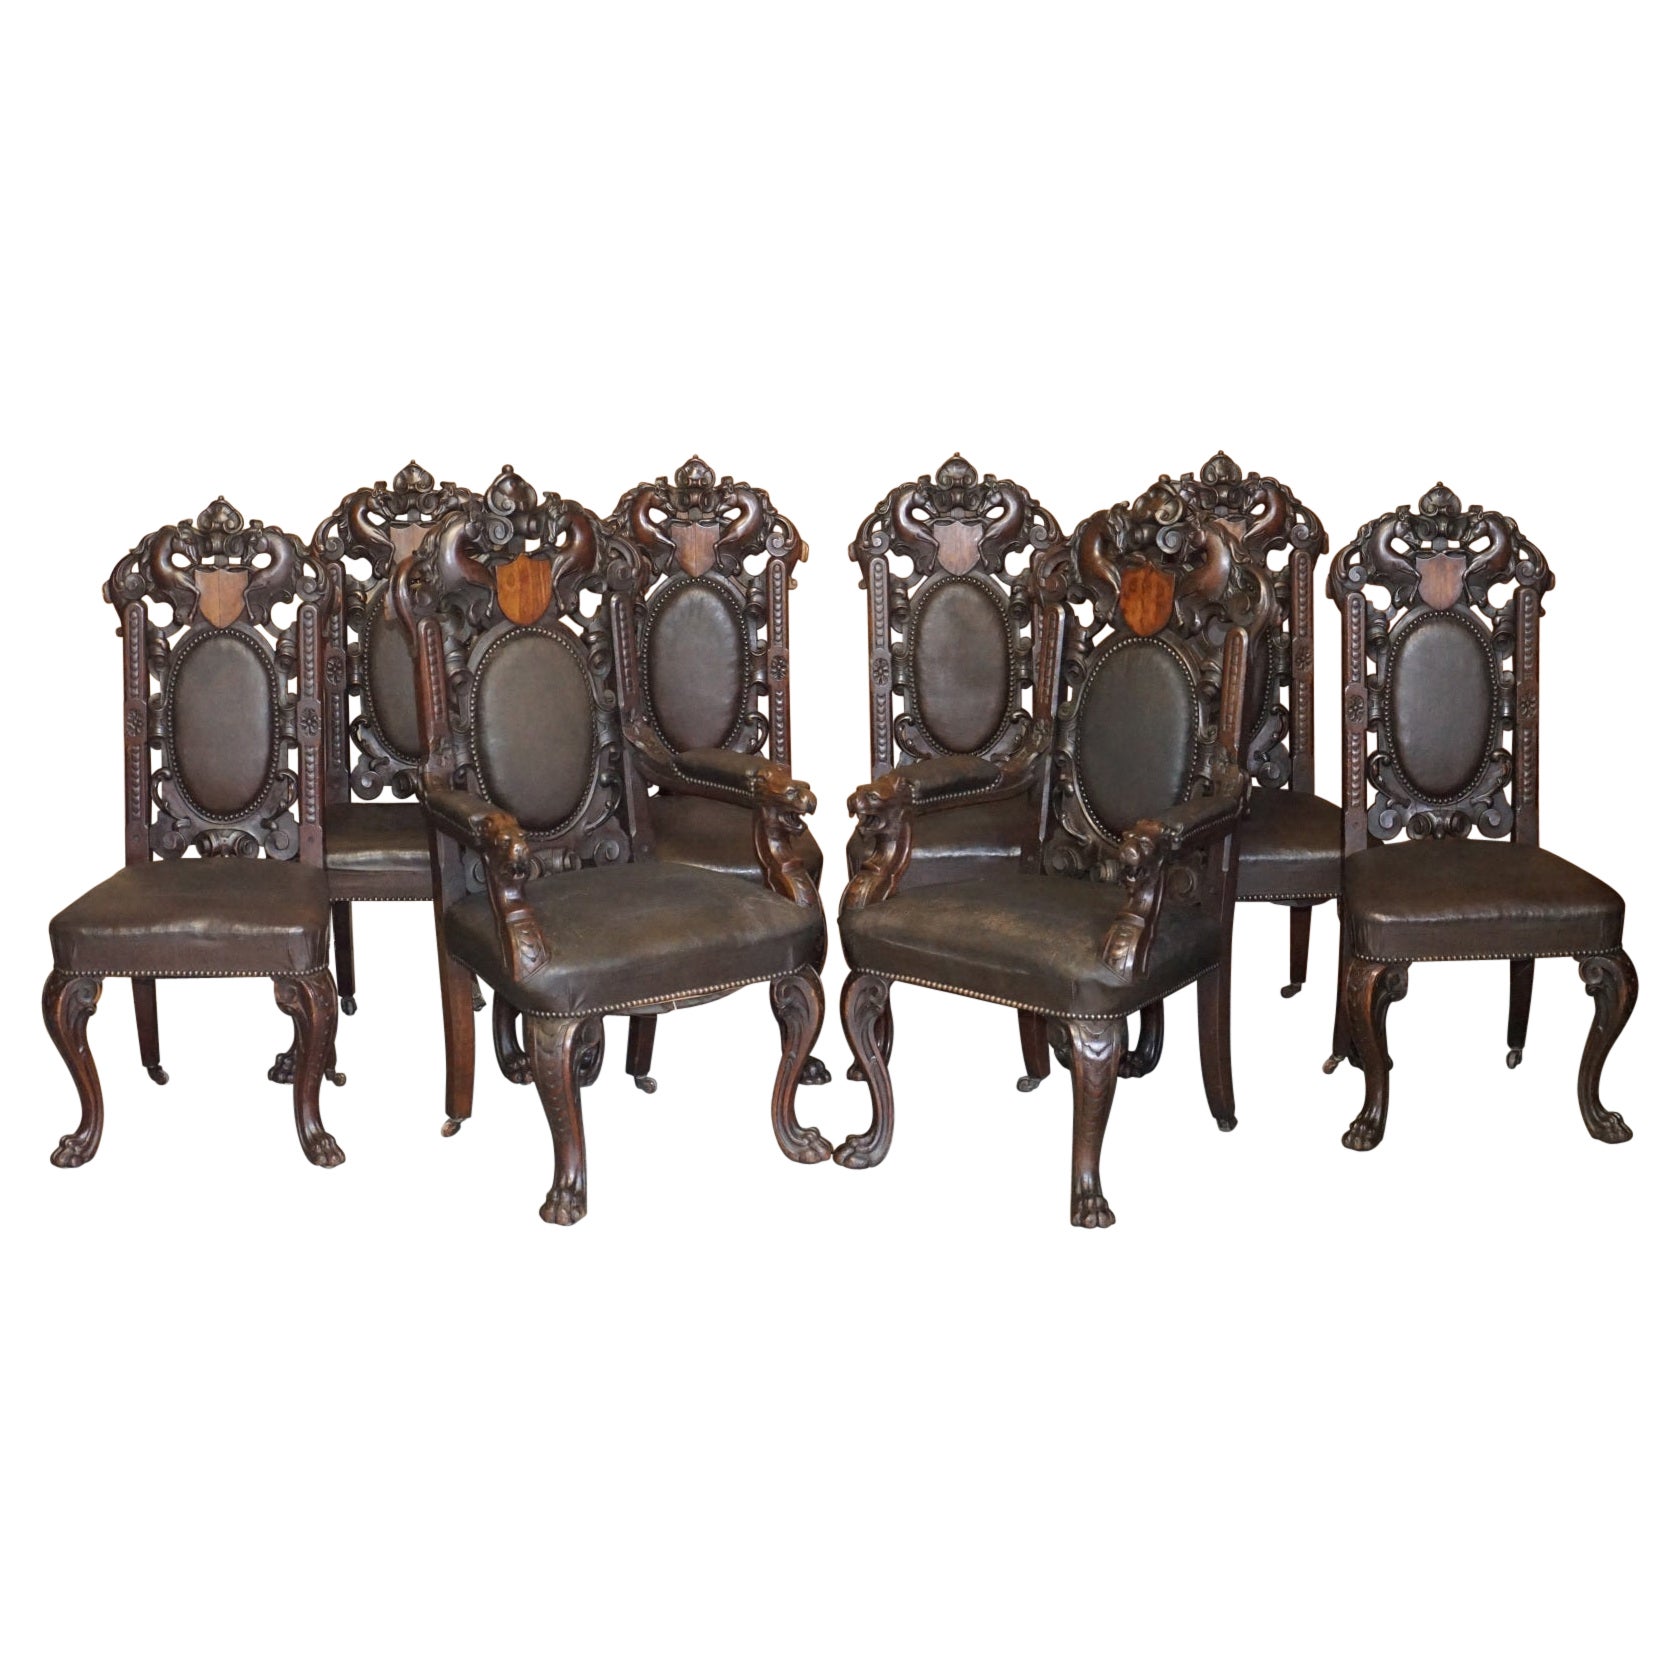 Winston Churchill Linked Harry Warren House Eight Antique Dining Carver Chairs